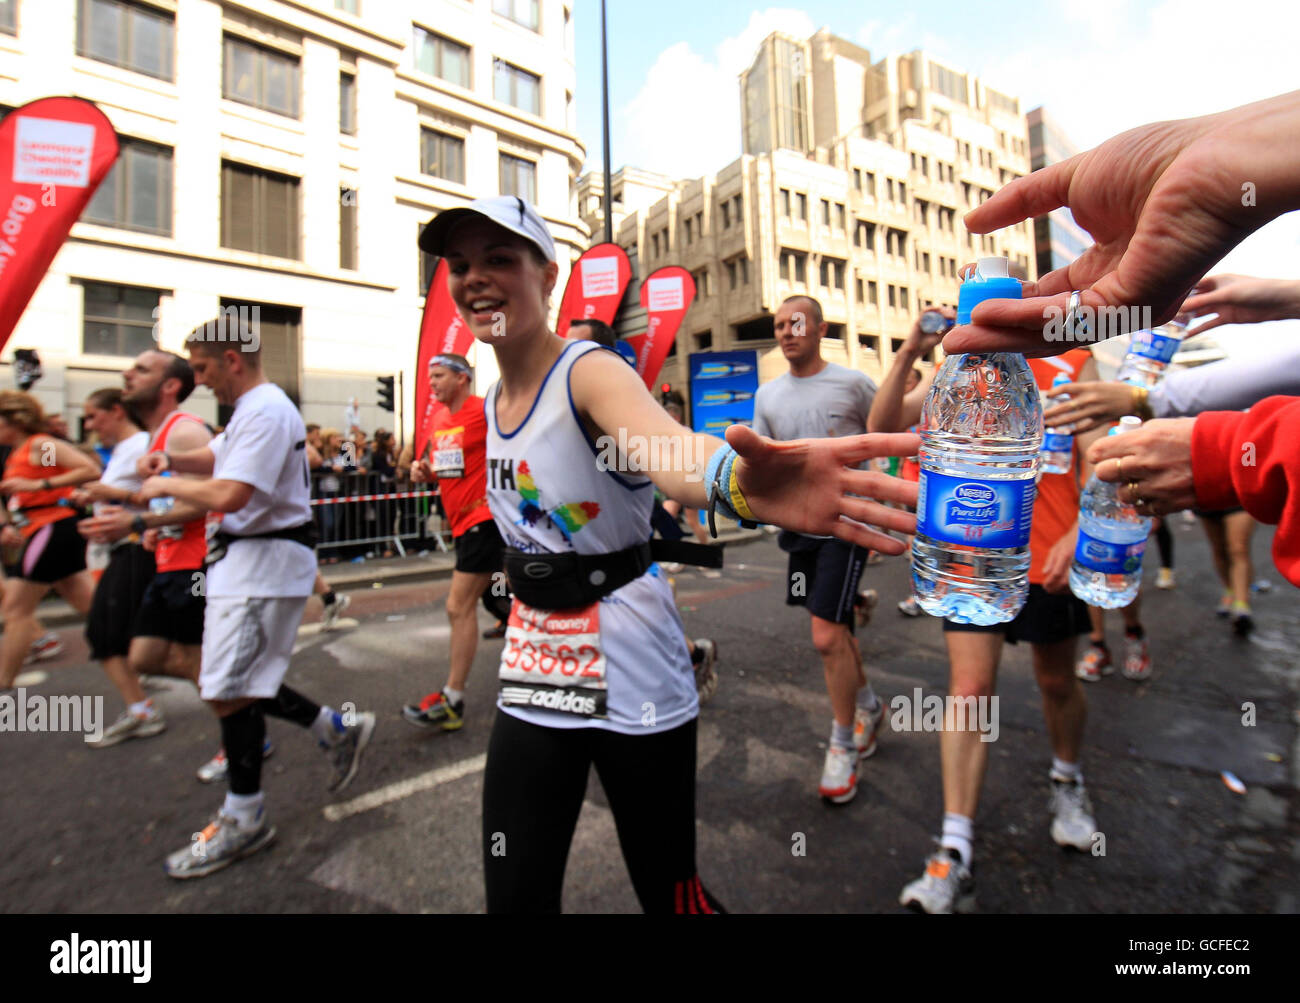 A water bottle is handed out to a participant during the 2010 Virgin London Marathon, London. Stock Photo